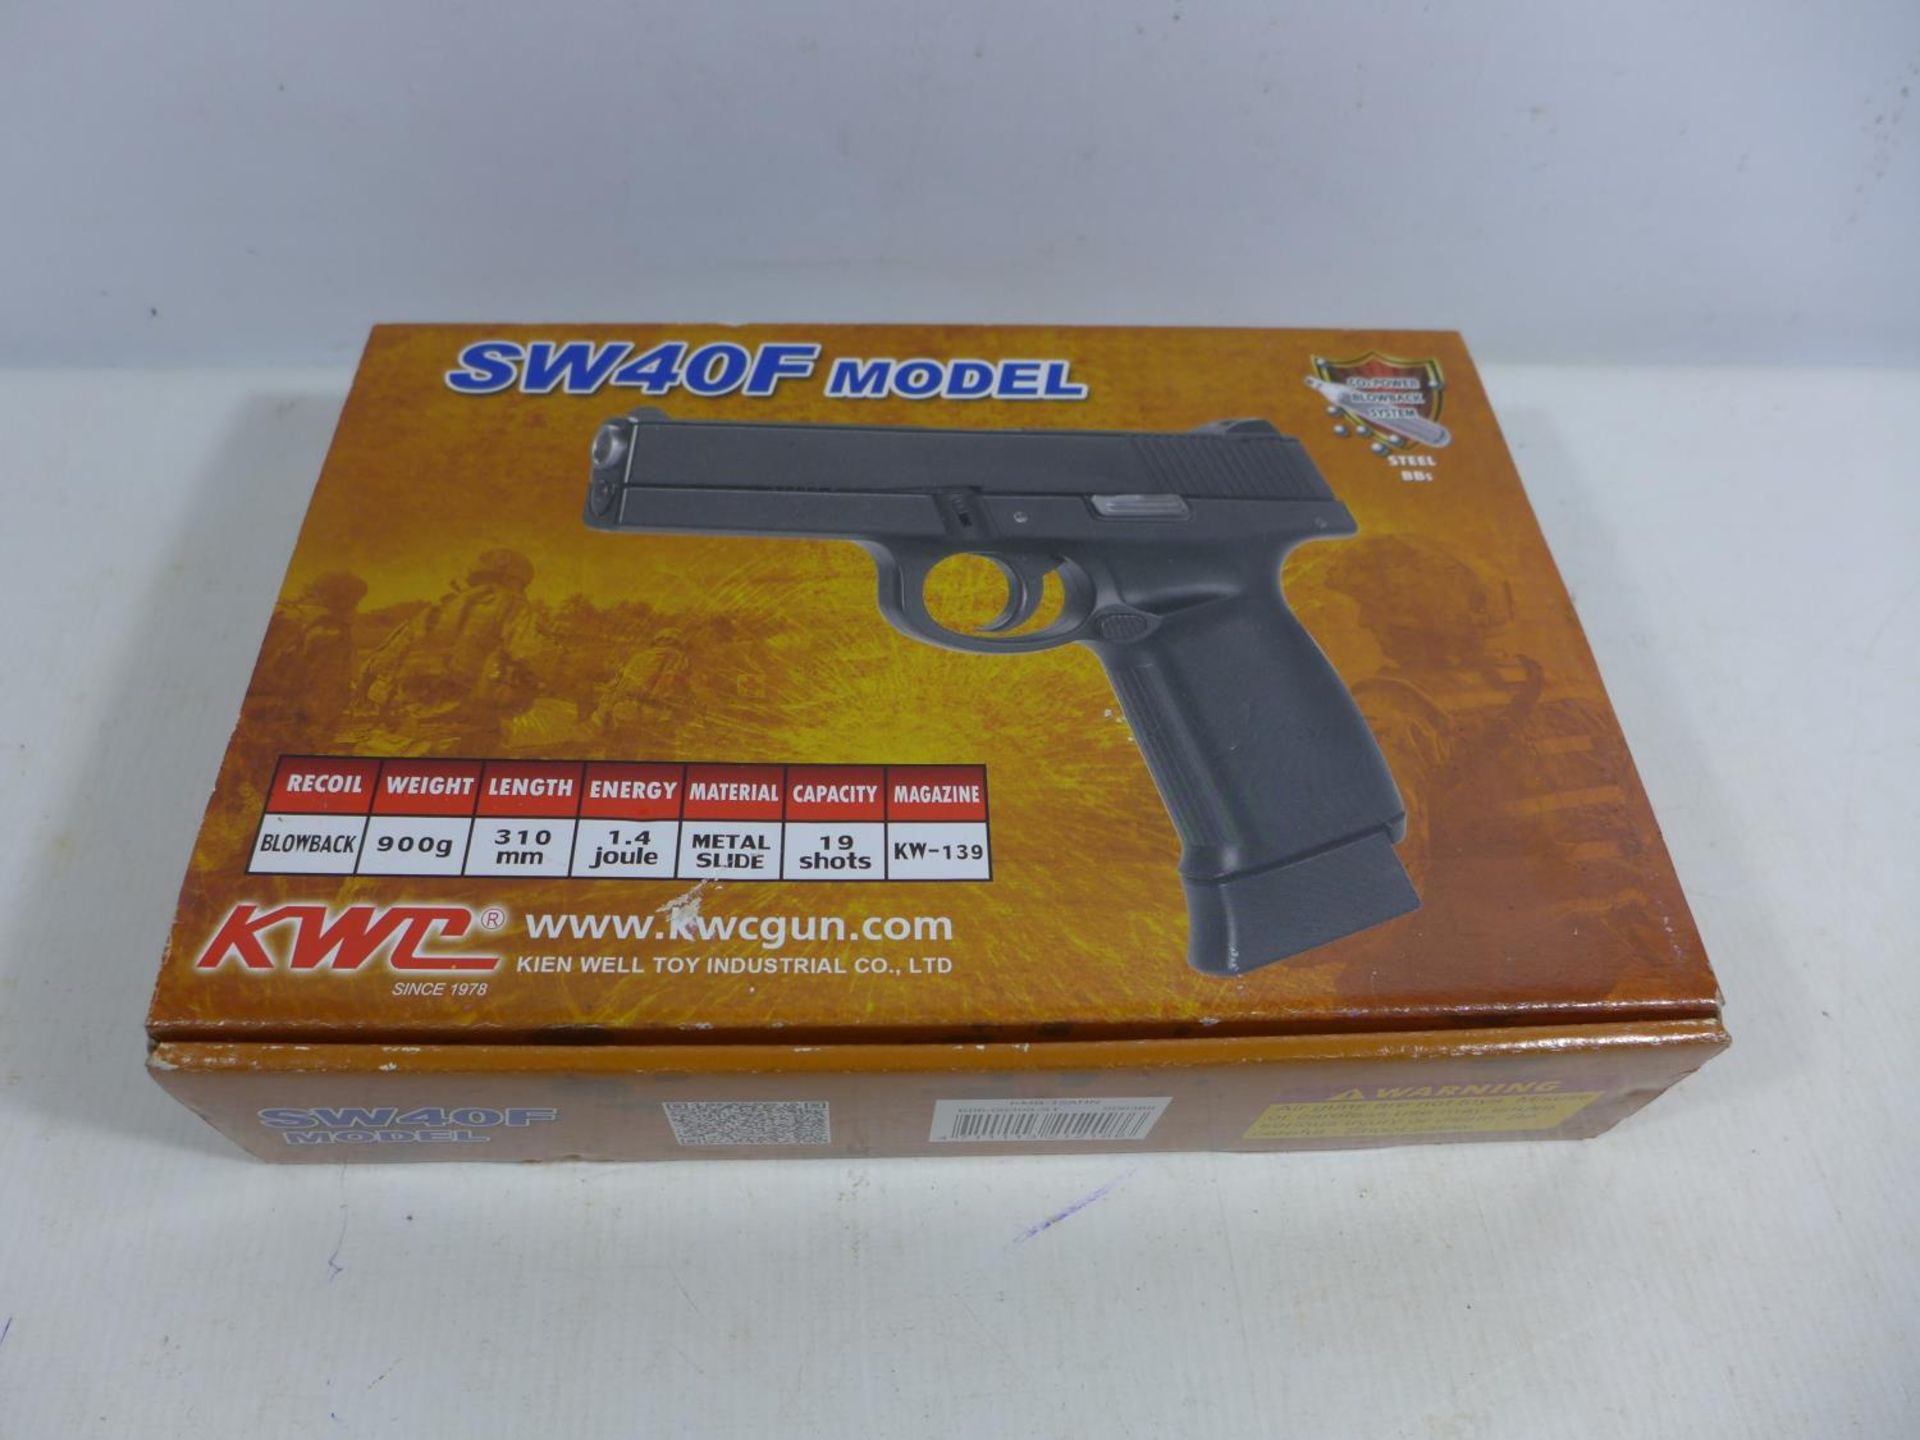 A BOXED AS NEW SW40F MODEL CO2 .177 CALIBRE AIR PISTOL, 11CM BARREL, LENGTH 19.5CM, COMPLETE WITH - Image 2 of 6